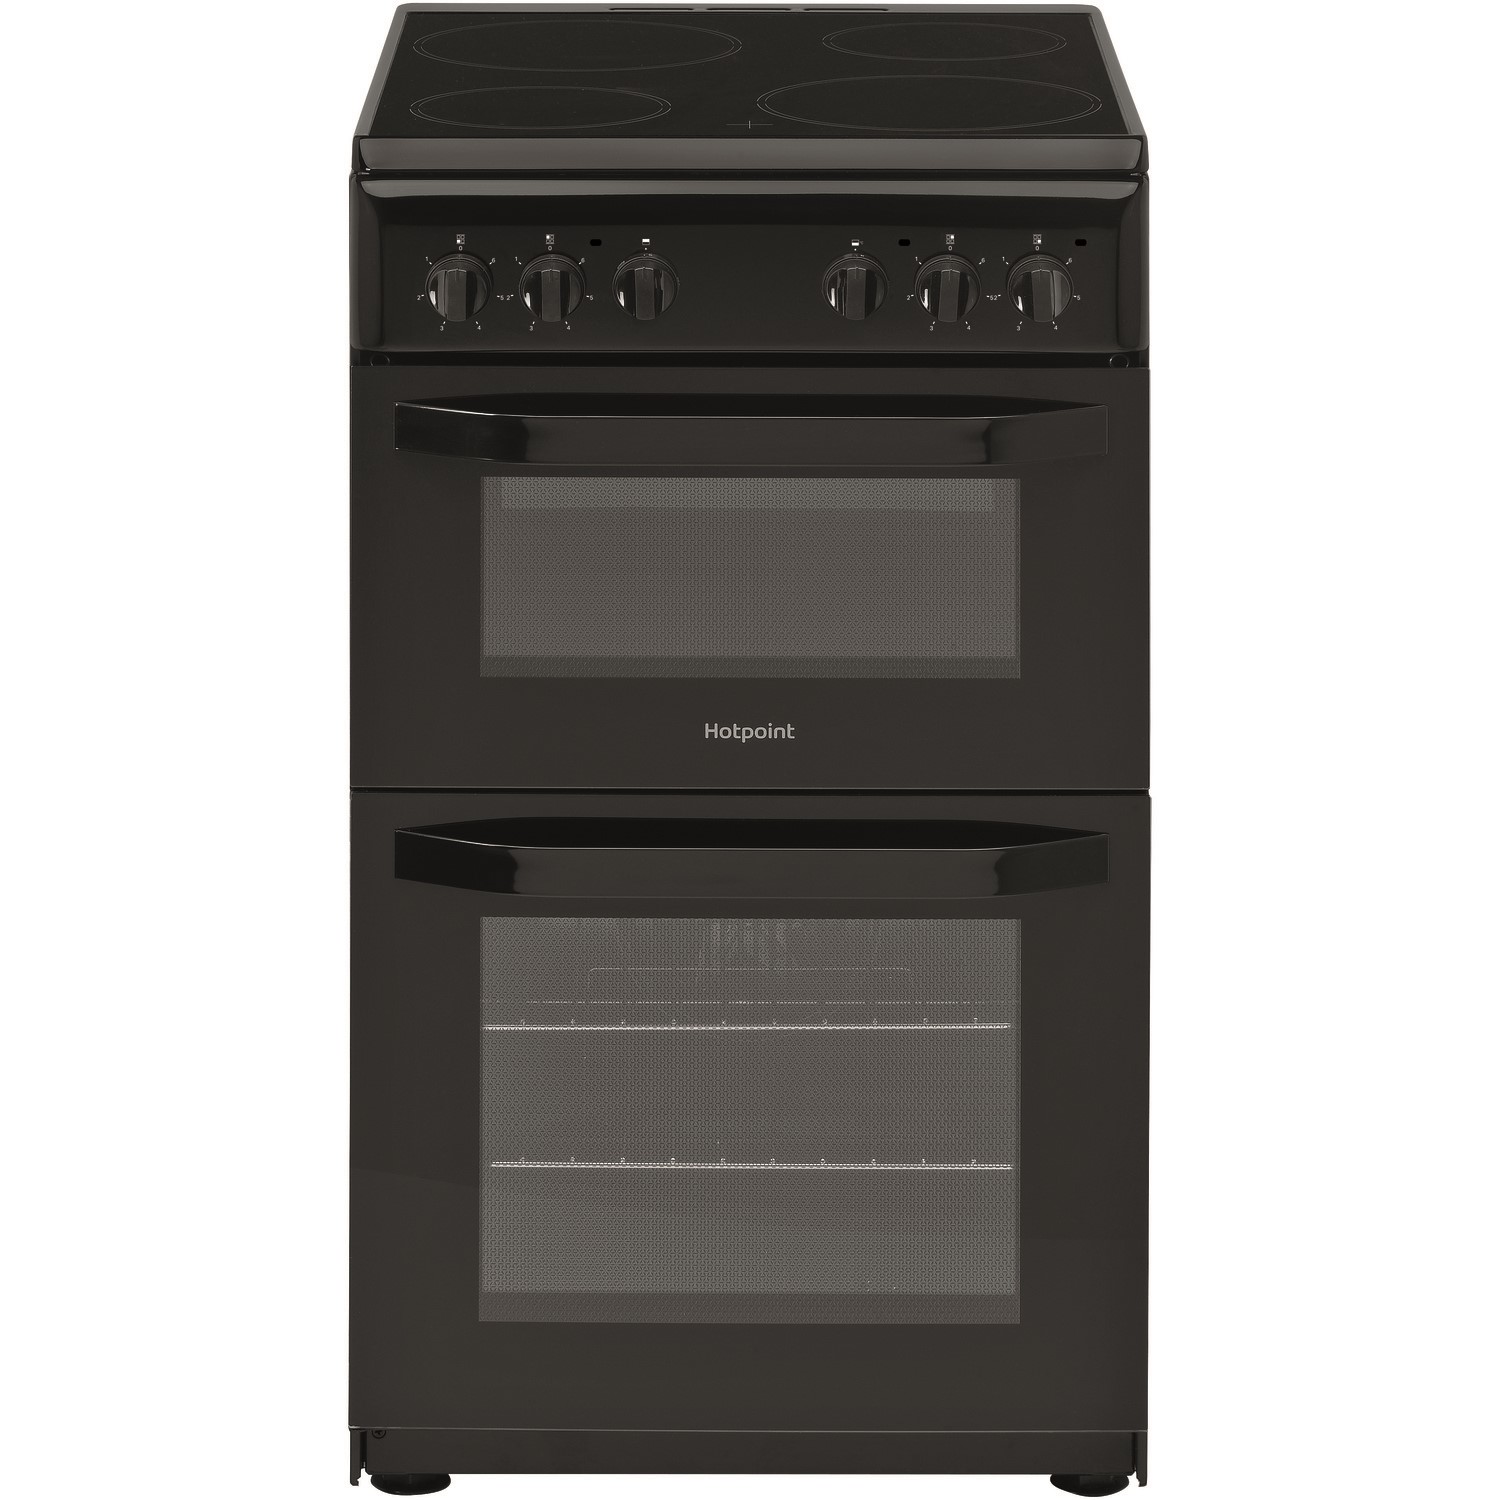 Hotpoint 50cm Double Cavity Electric Cooker with Ceramic Hob - Black